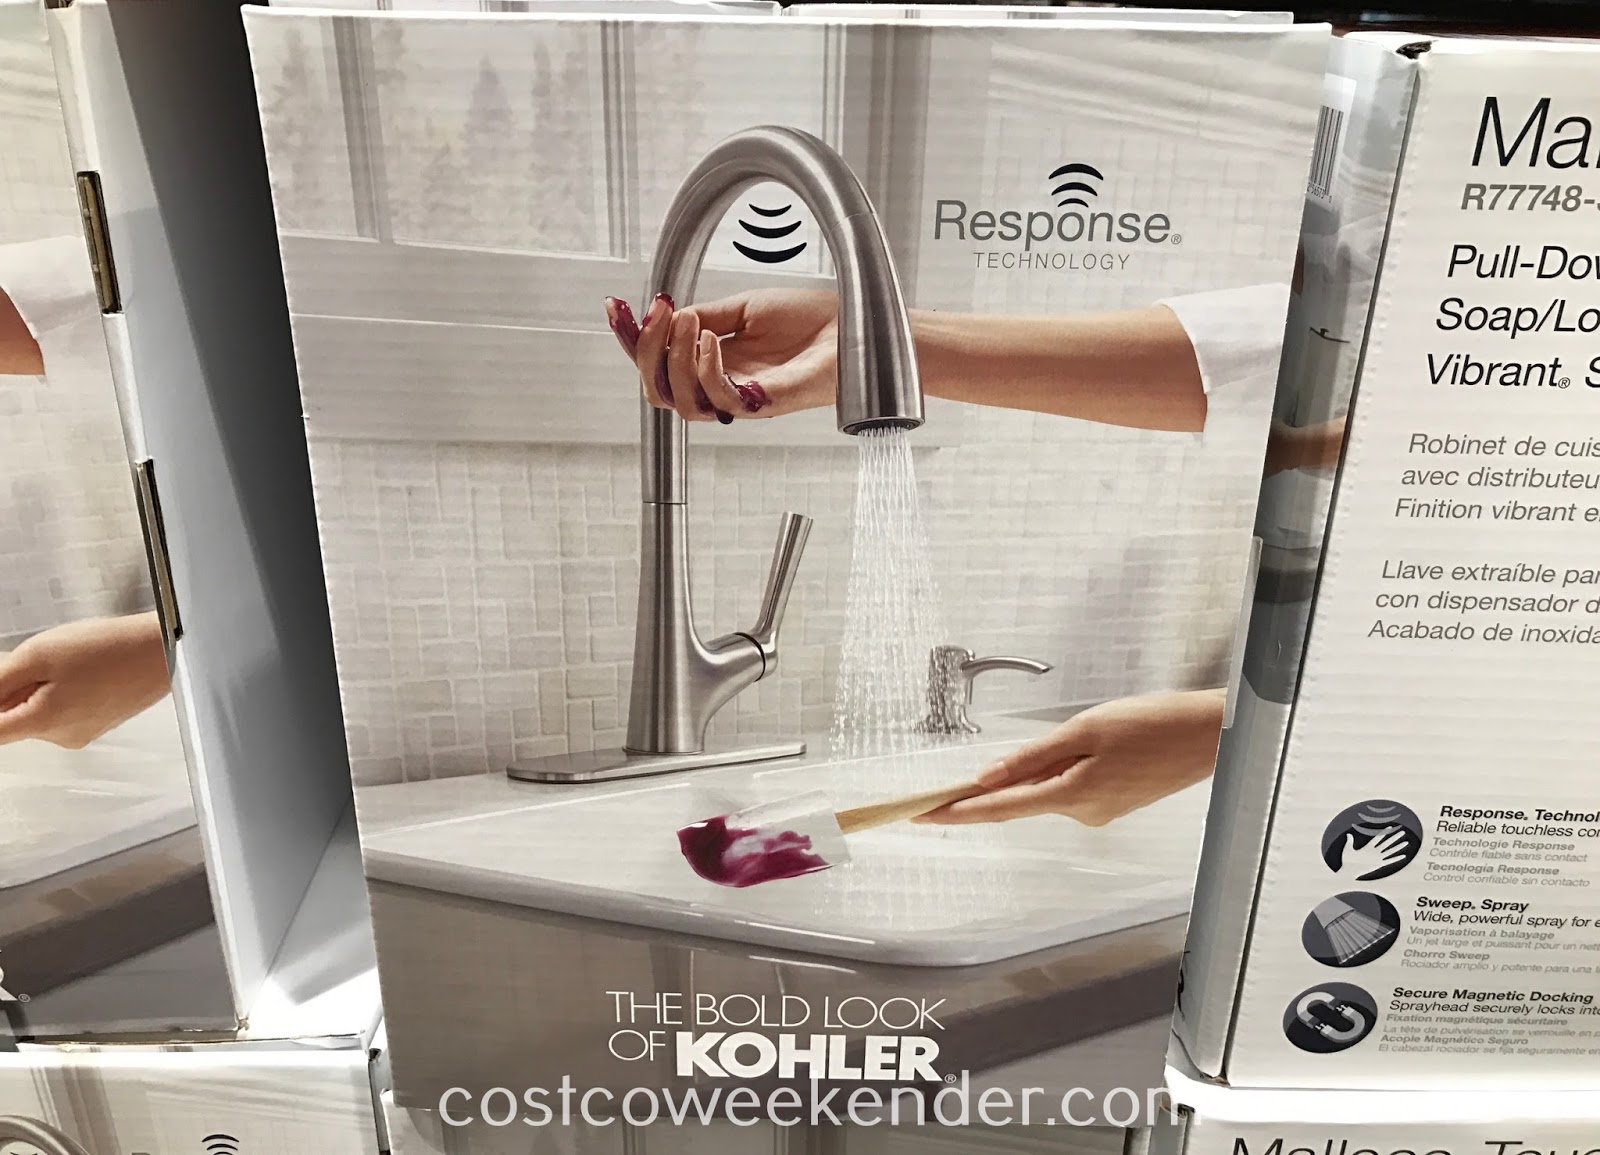 Kohler Malleco Touchless Pull Down Kitchen Faucet Costco Weekender